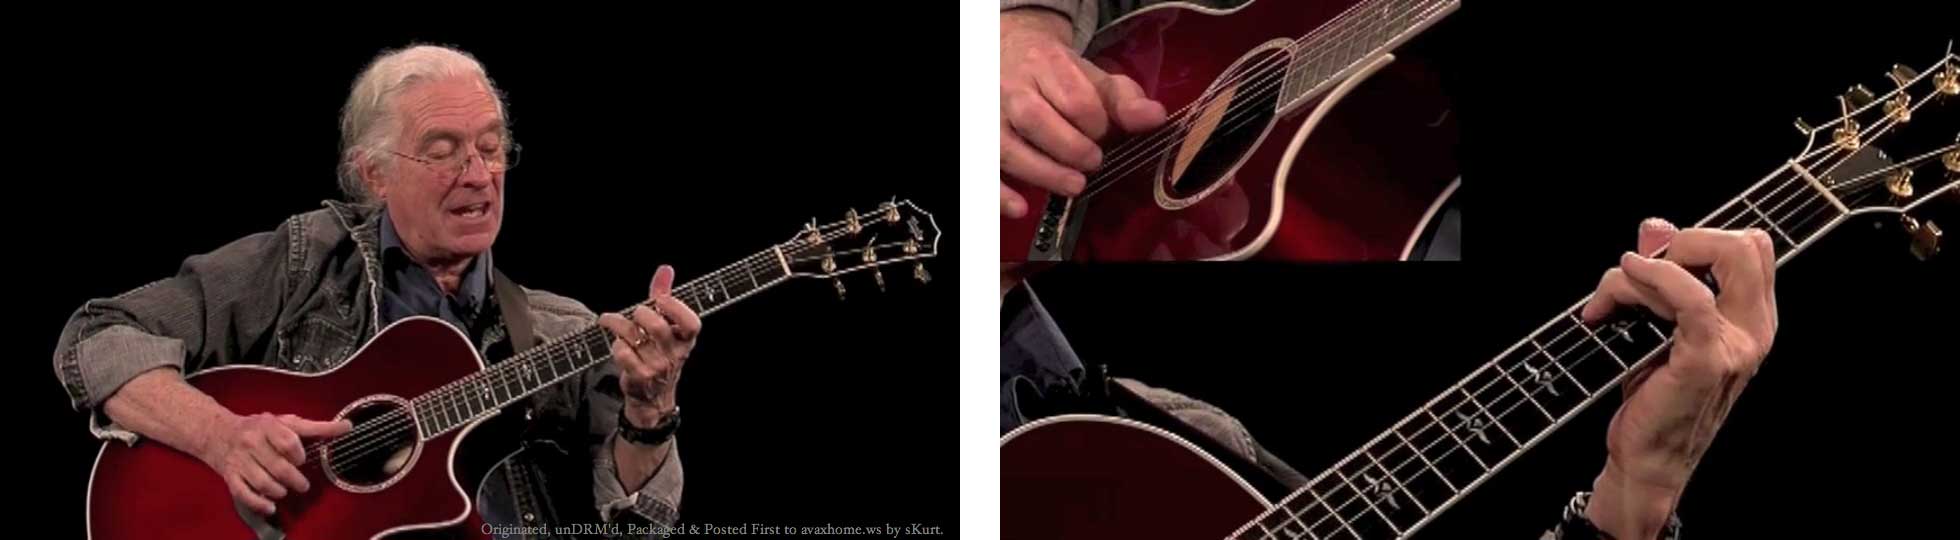 Grossman Guitar Workshop - David Laibman - Playing The Classic Rags - 2xDVD (2012)